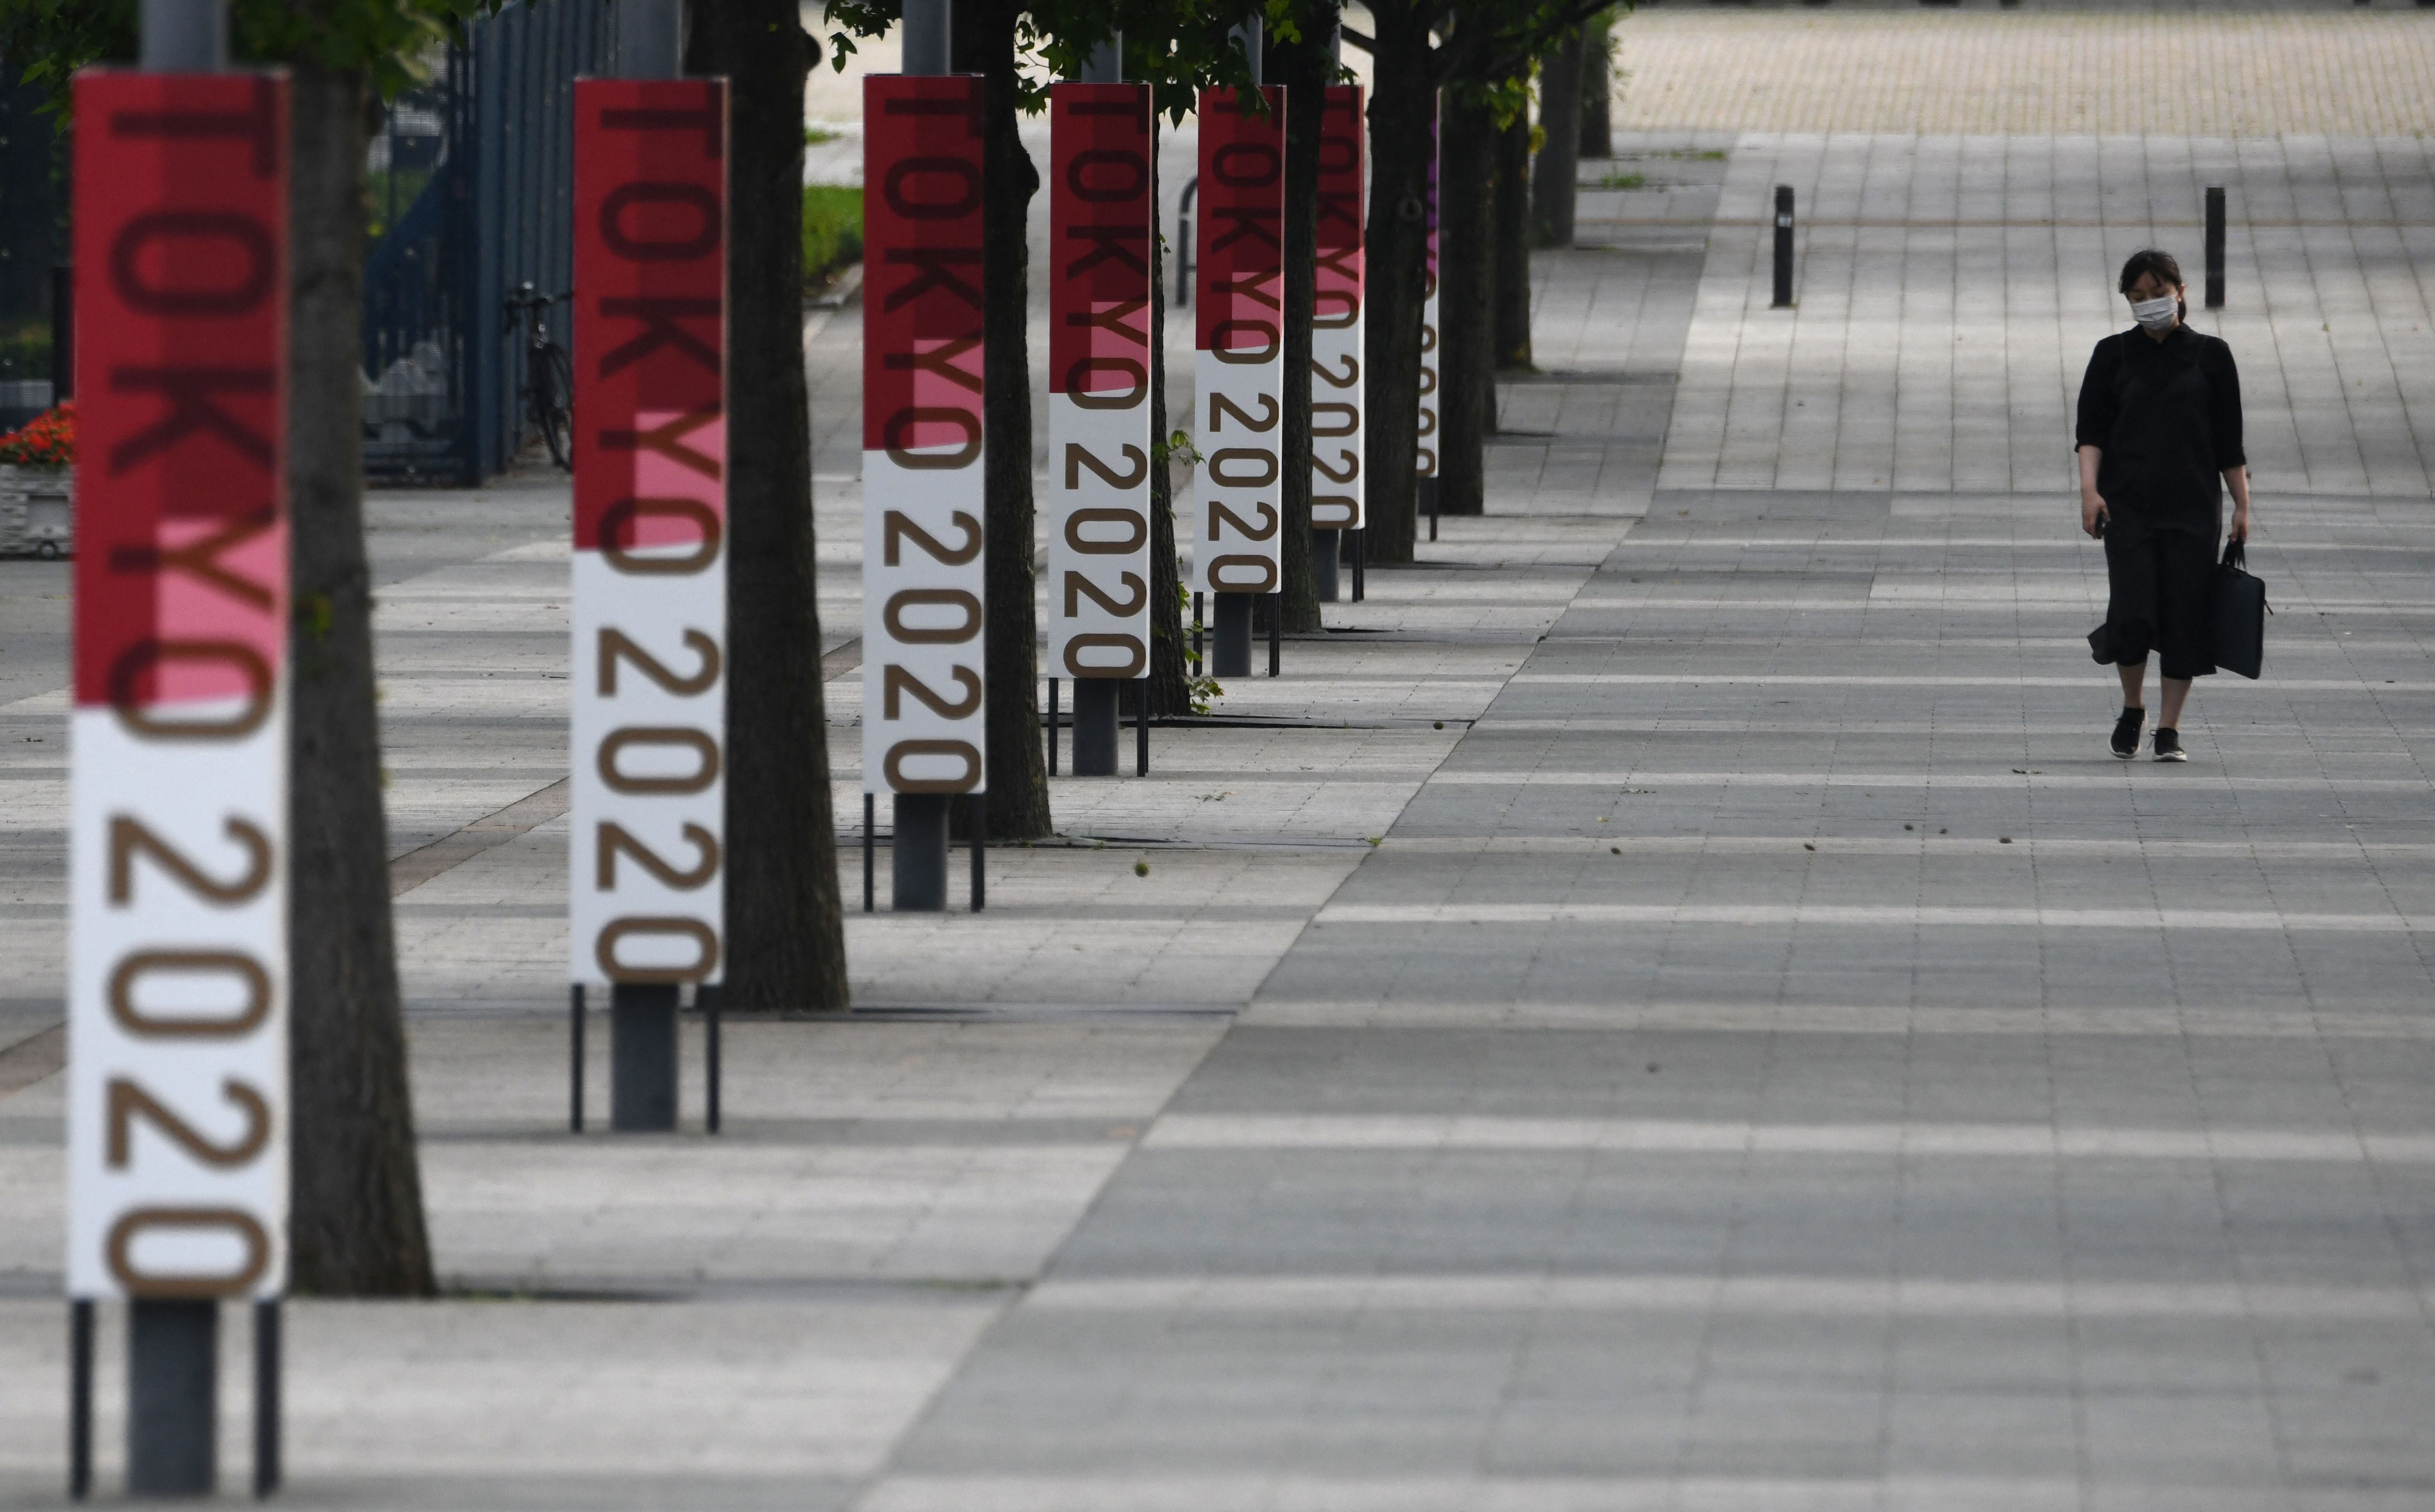 The logos of Tokyo 2020 are displayed at a street near Odaiba Seaside Park in the Japanese capital